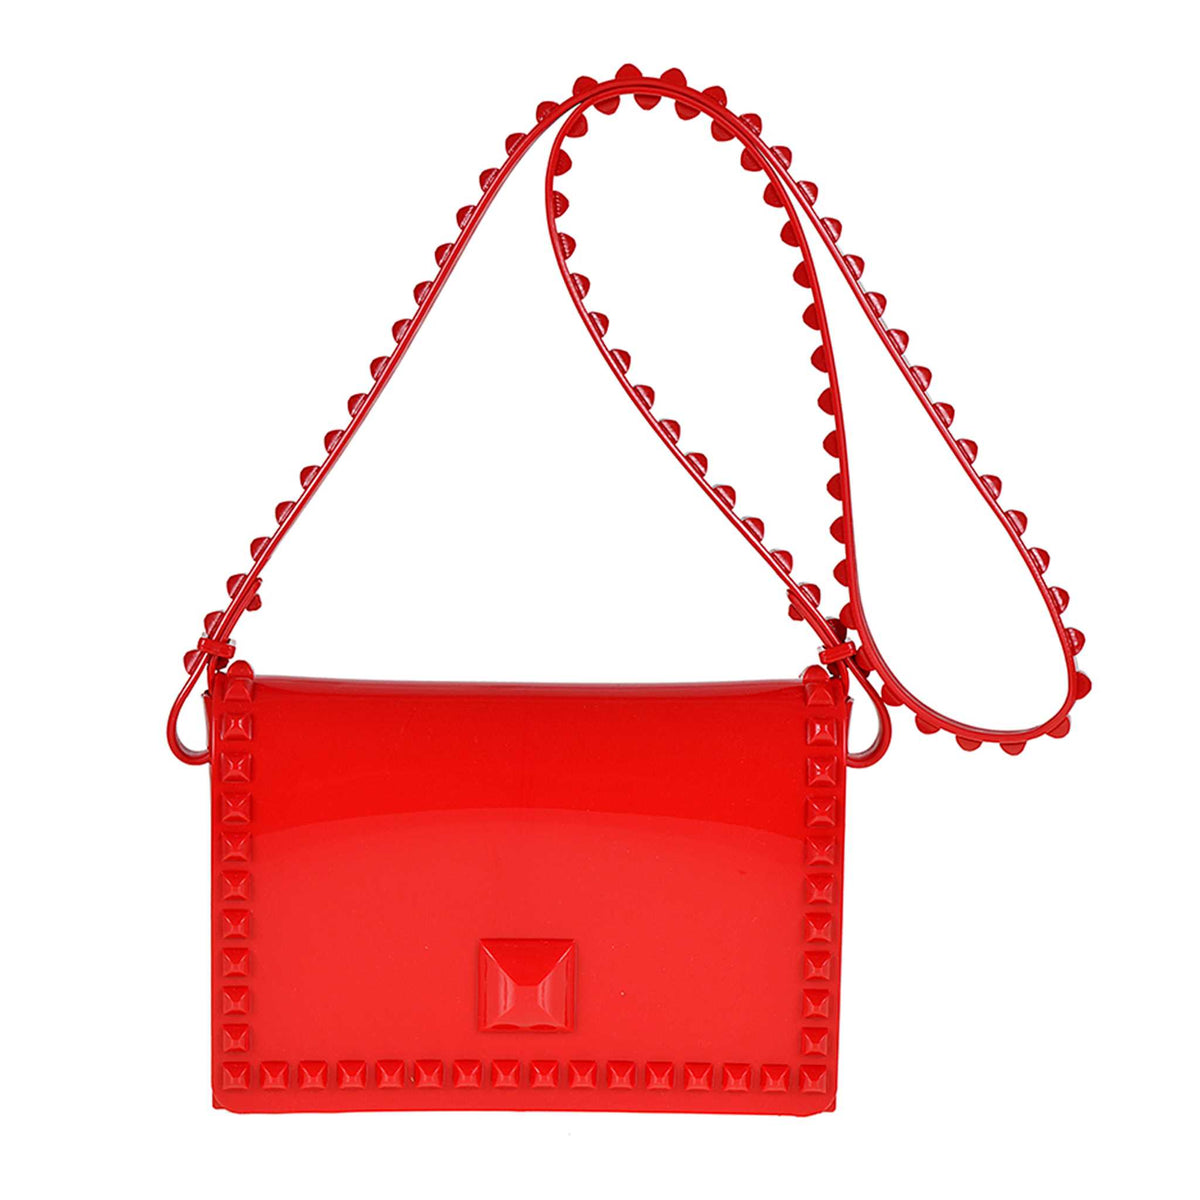 Jelly crossbody purse in color red from Carmen Sol